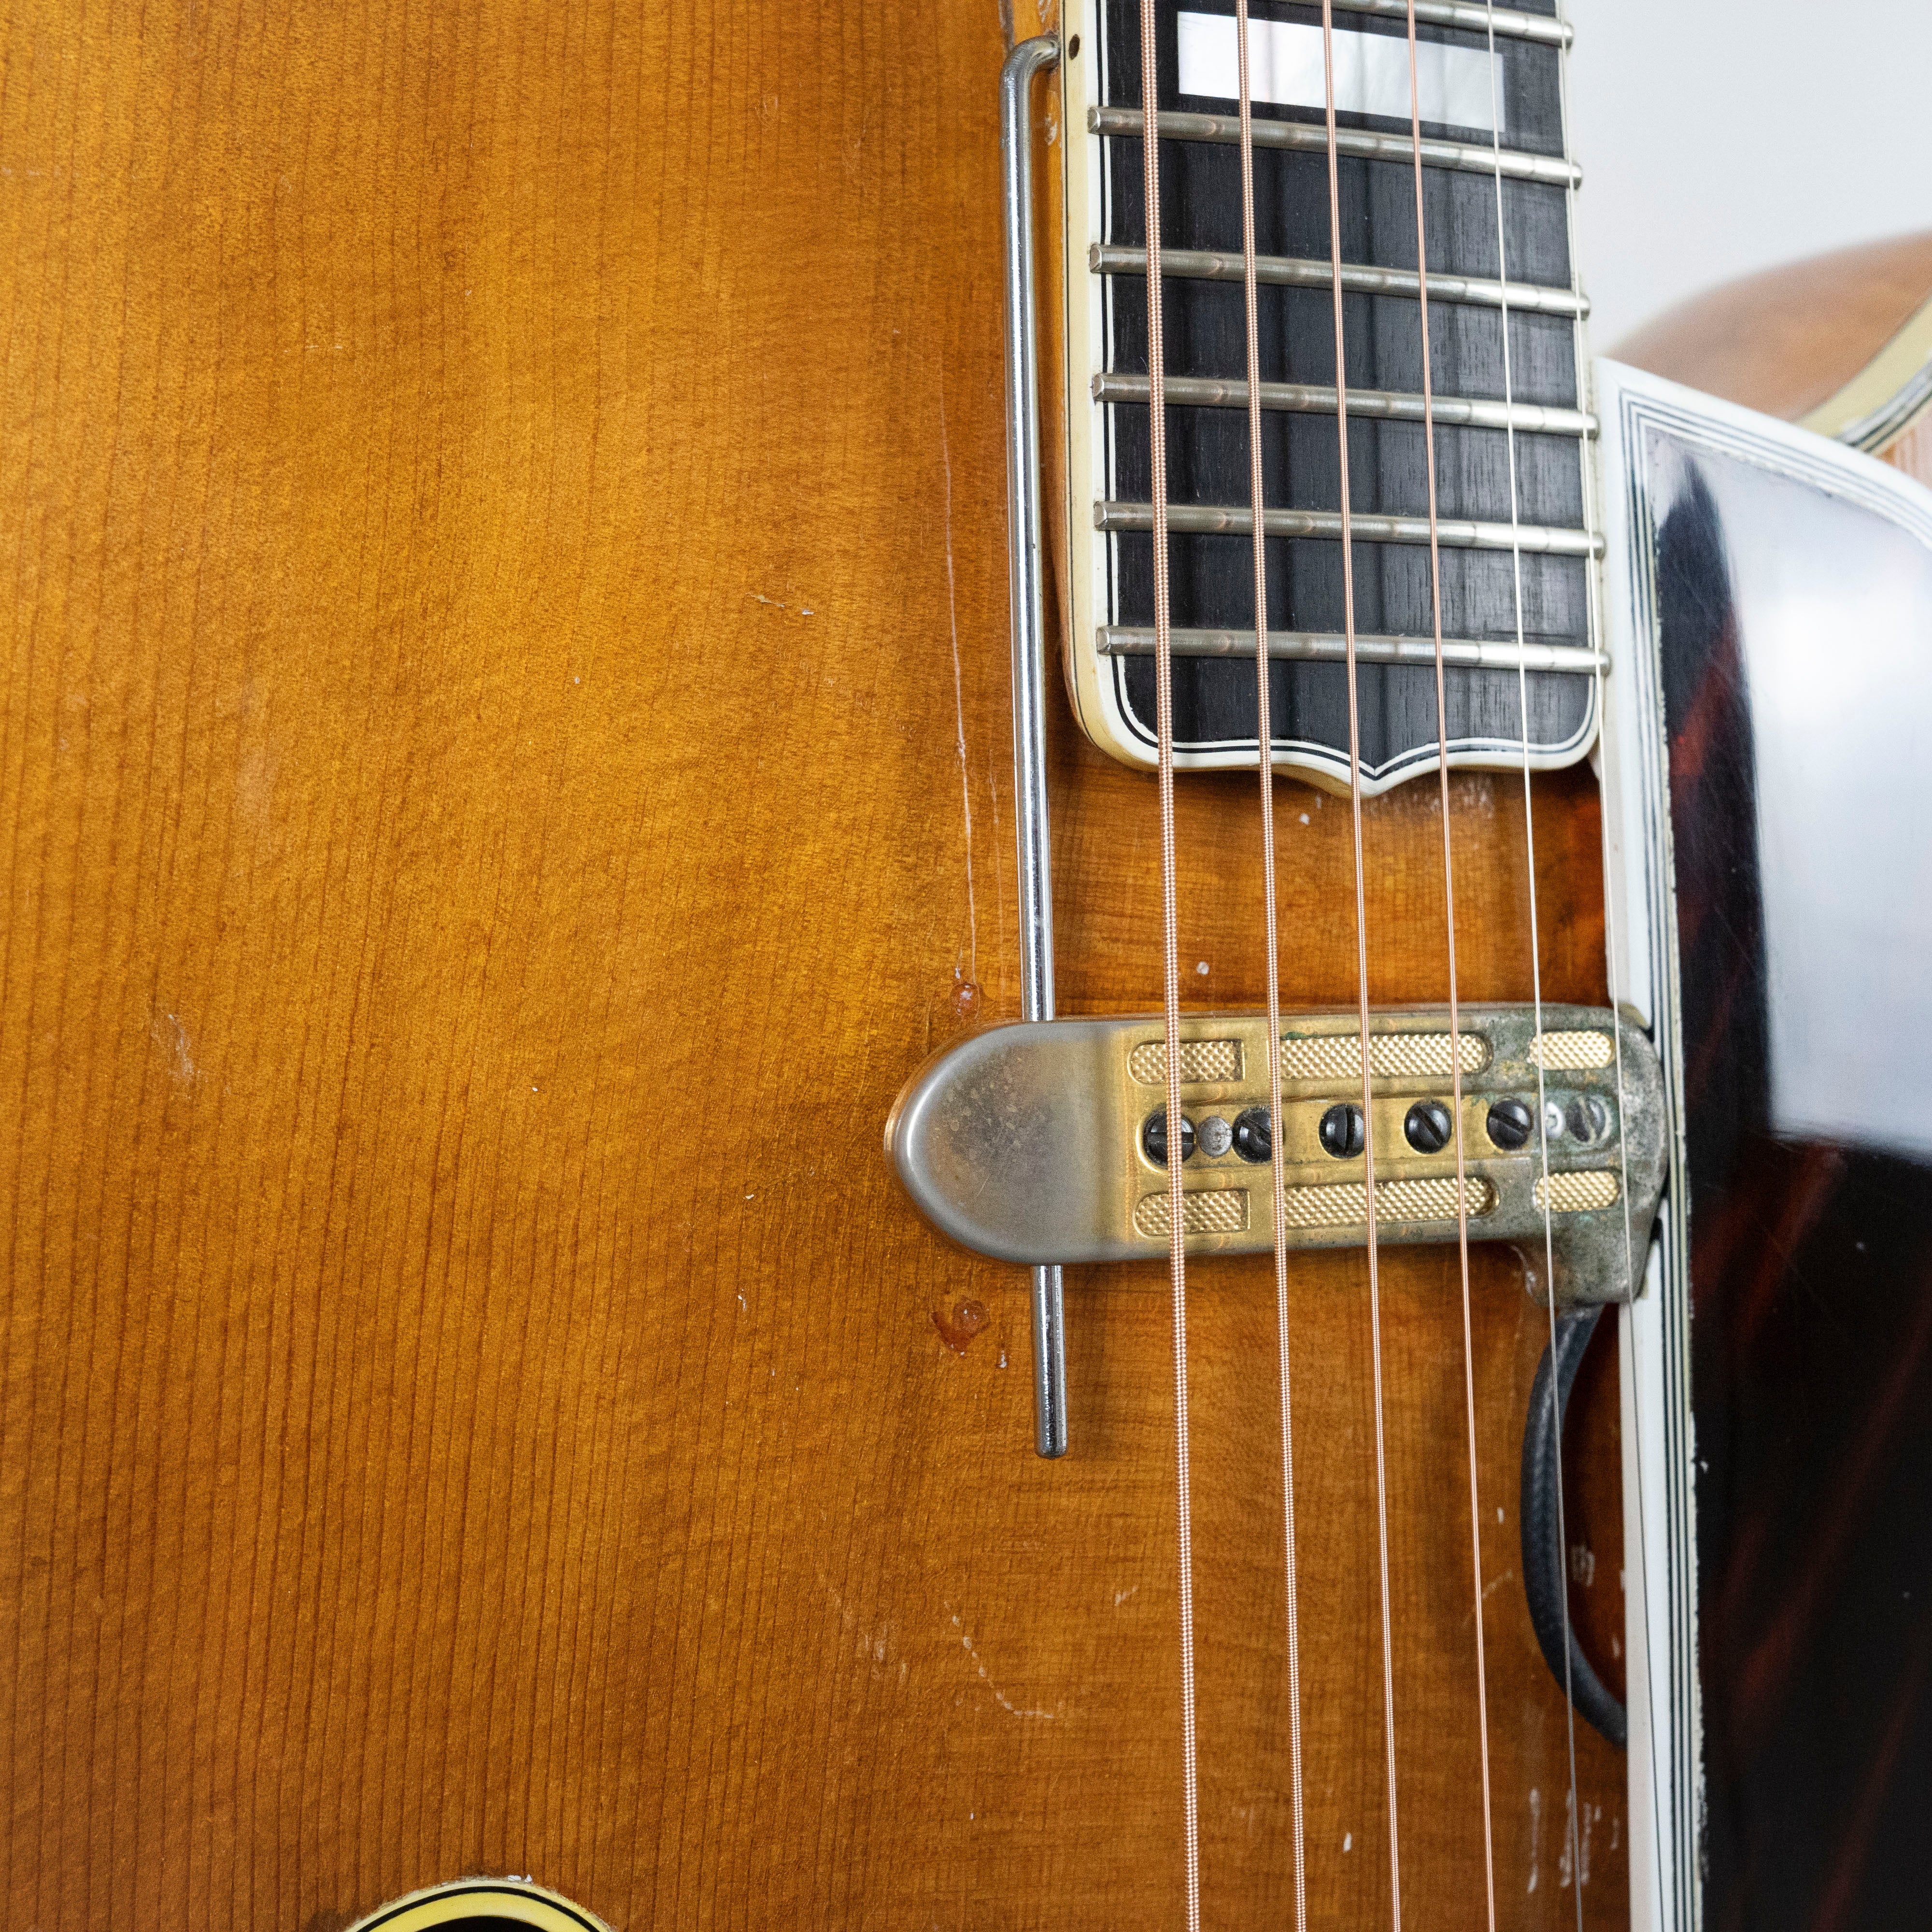 D'Angelico 1949 New Yorker Blonde